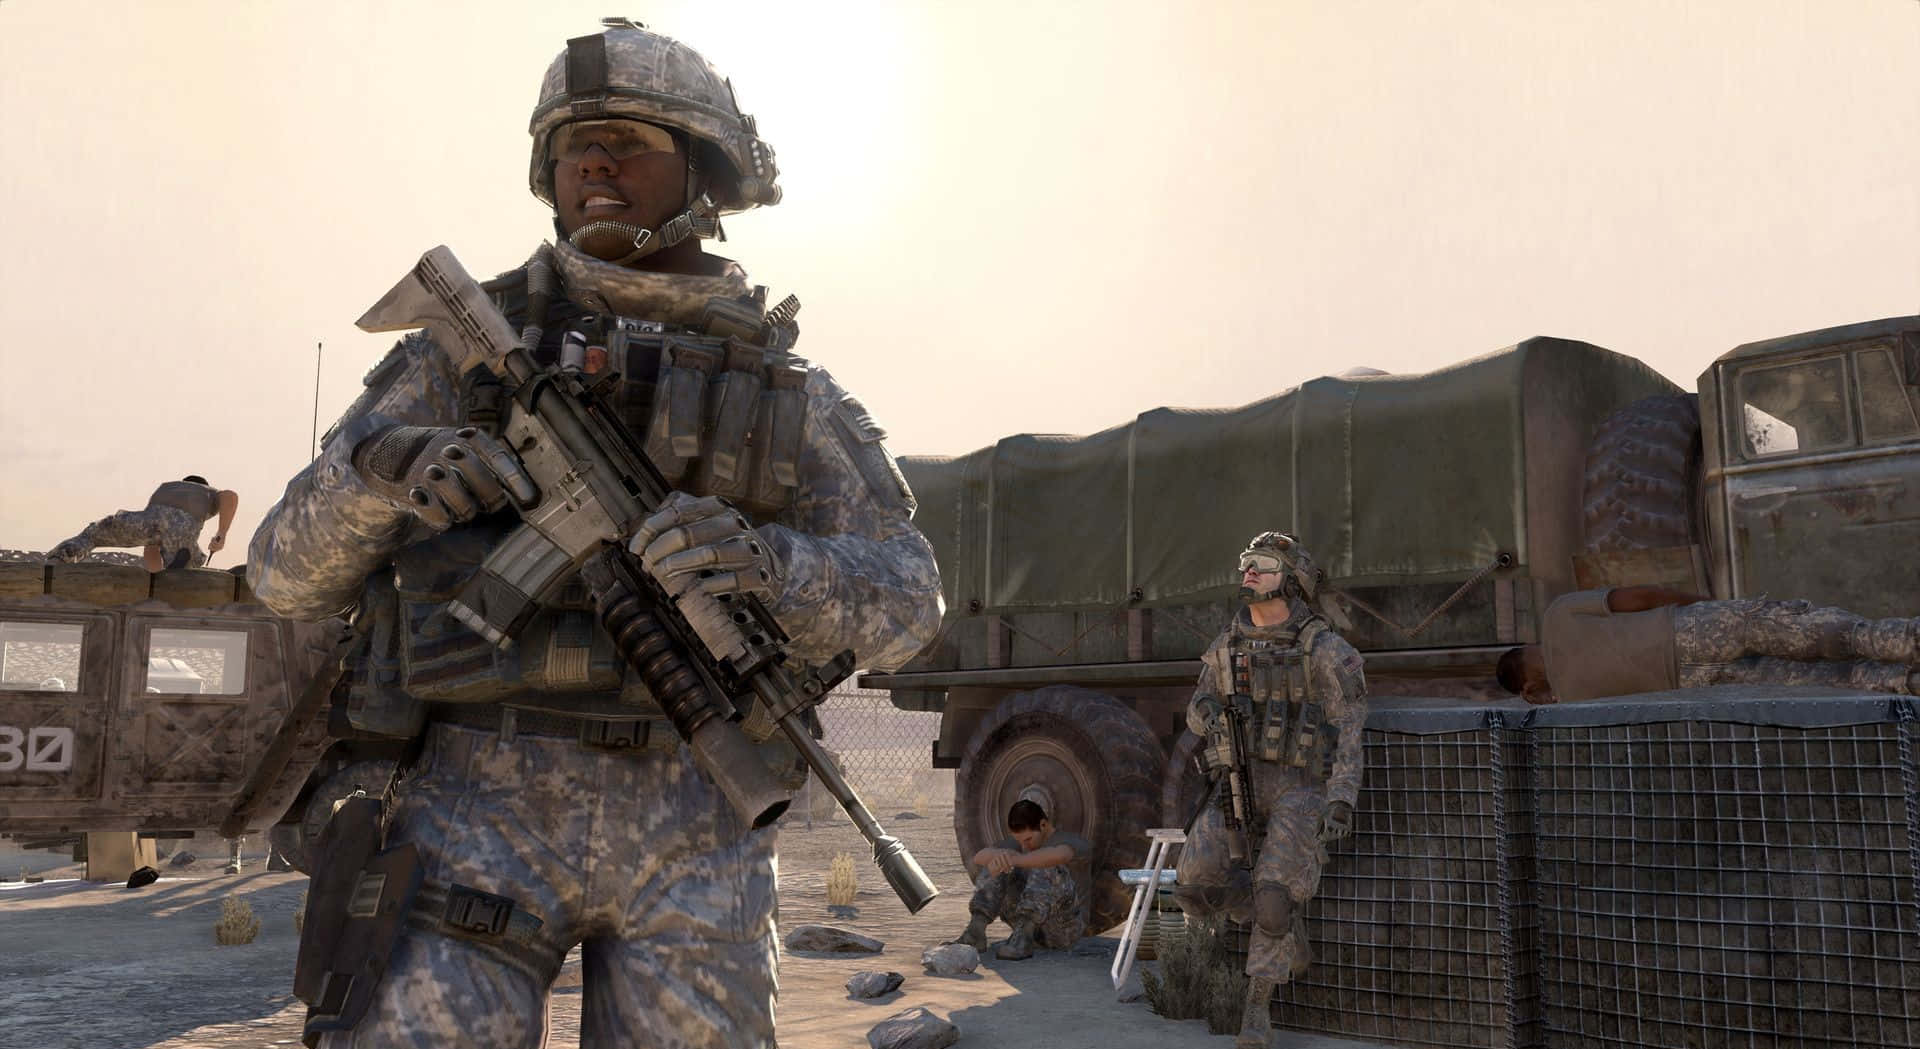 Elite Call Of Duty Soldiers in Action Wallpaper